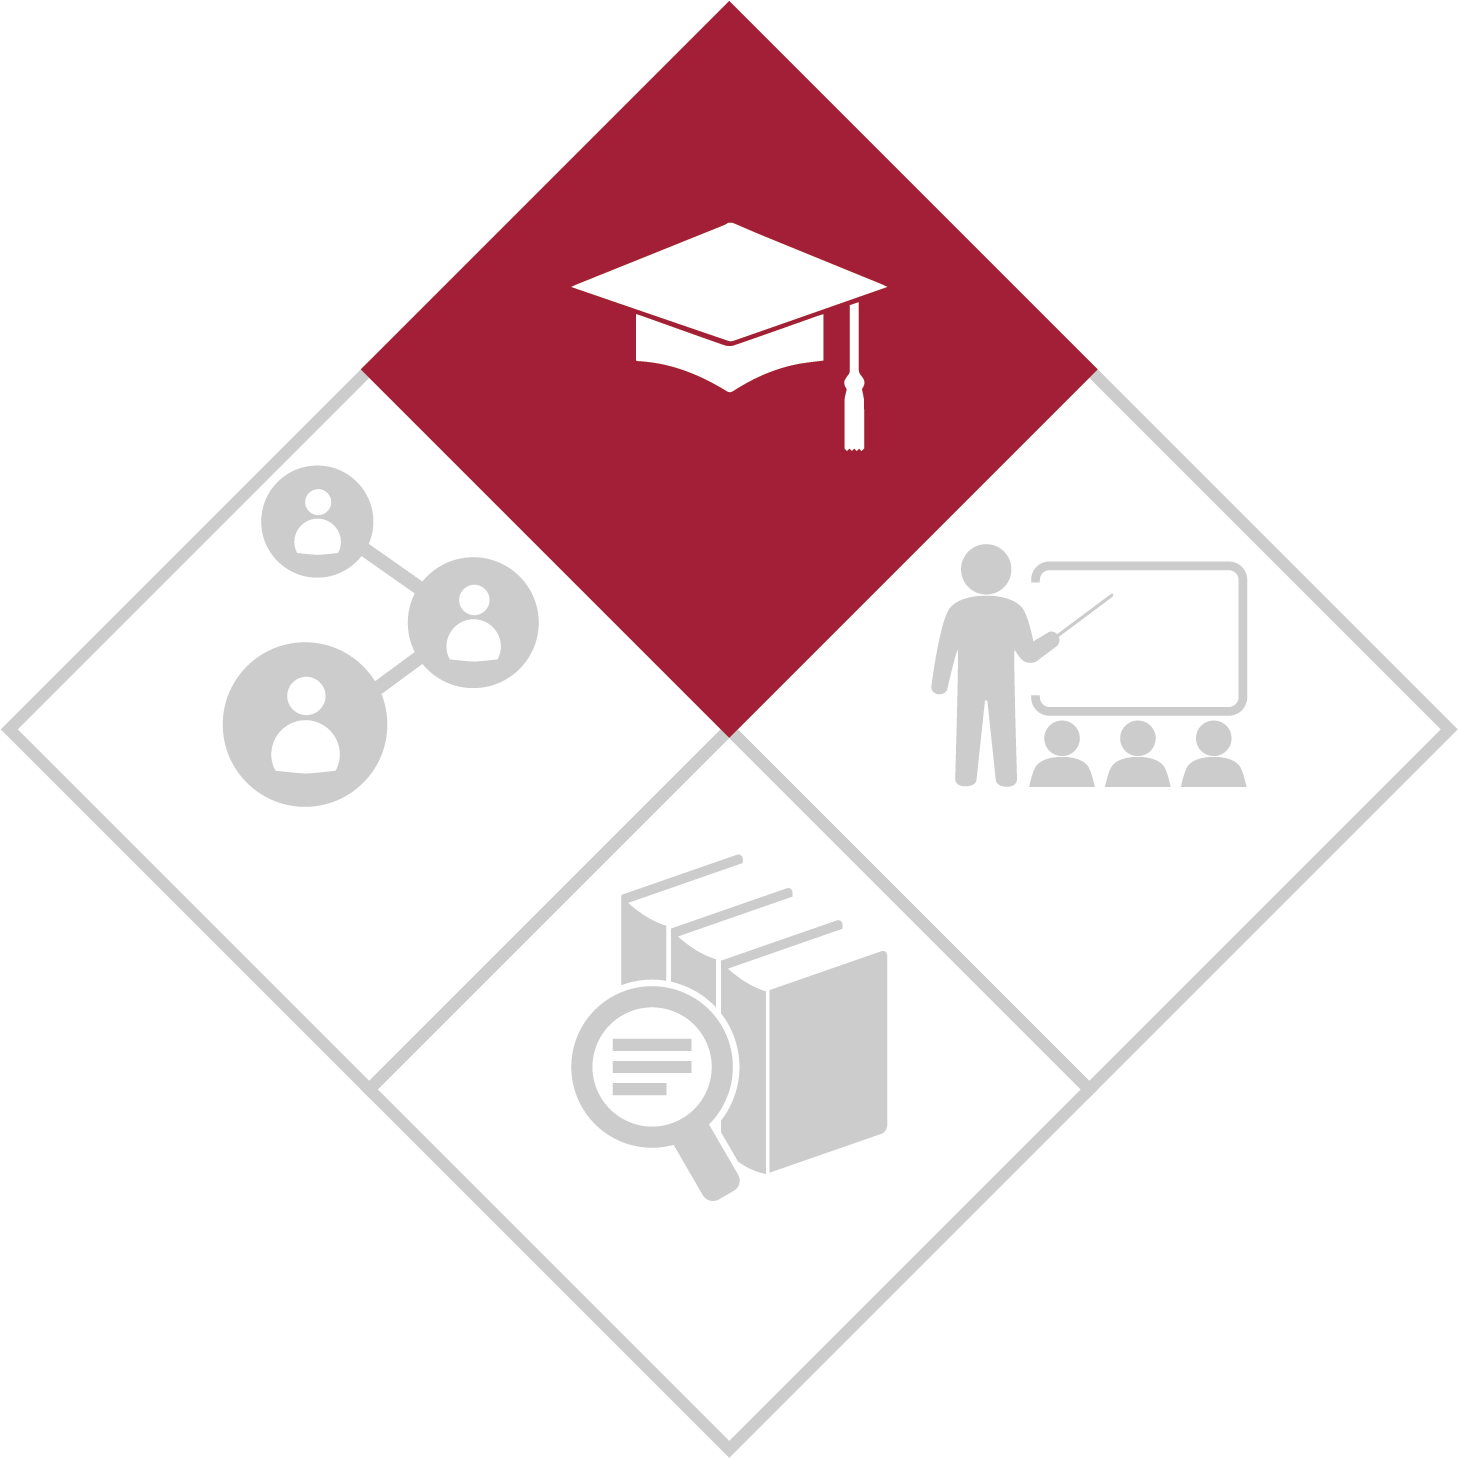 The image emphasizes the graduation cap inside a smaller diamond, representing the STUDENT INVESTED domain.